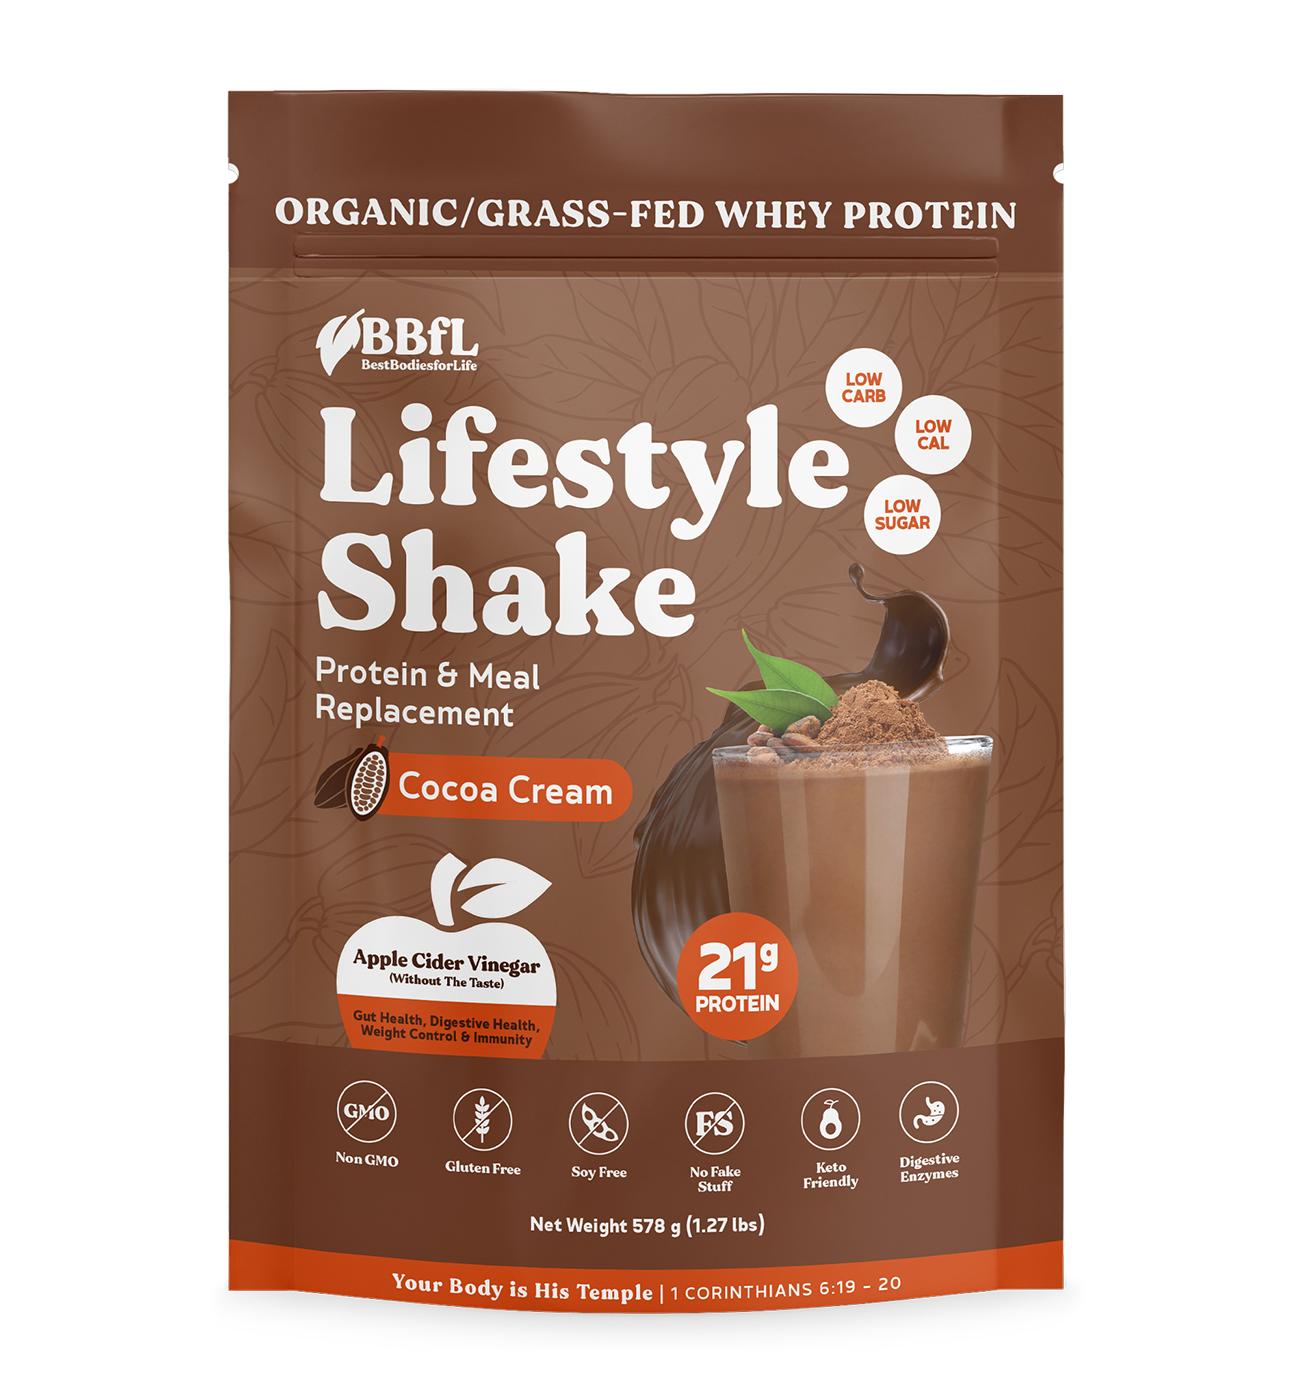 BestBodiesforLife 15g Protein & Meal Replacement Shake - Cocoa Cream; image 1 of 2